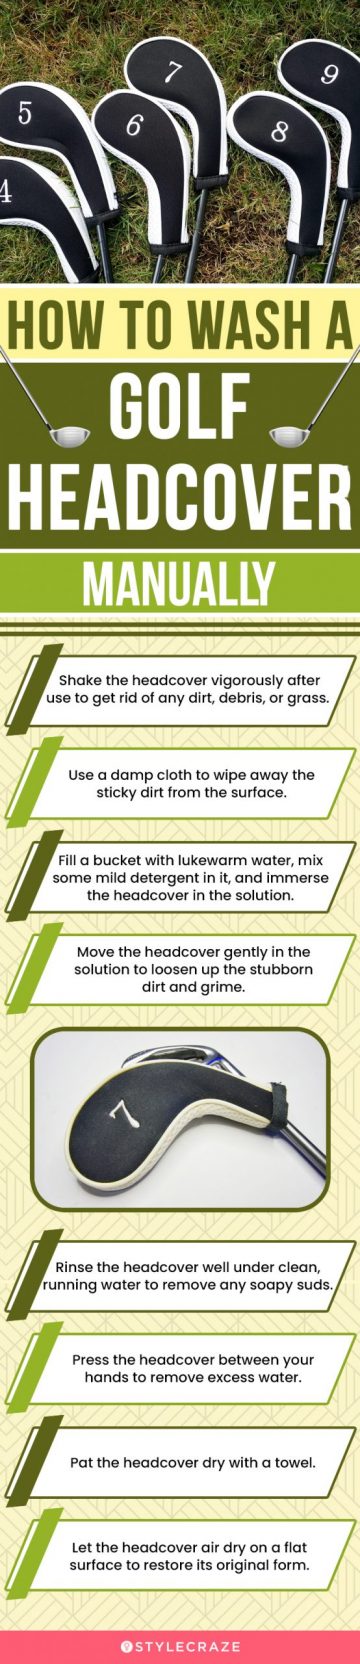 How To Wash A Golf Headcover Manually (infographic)